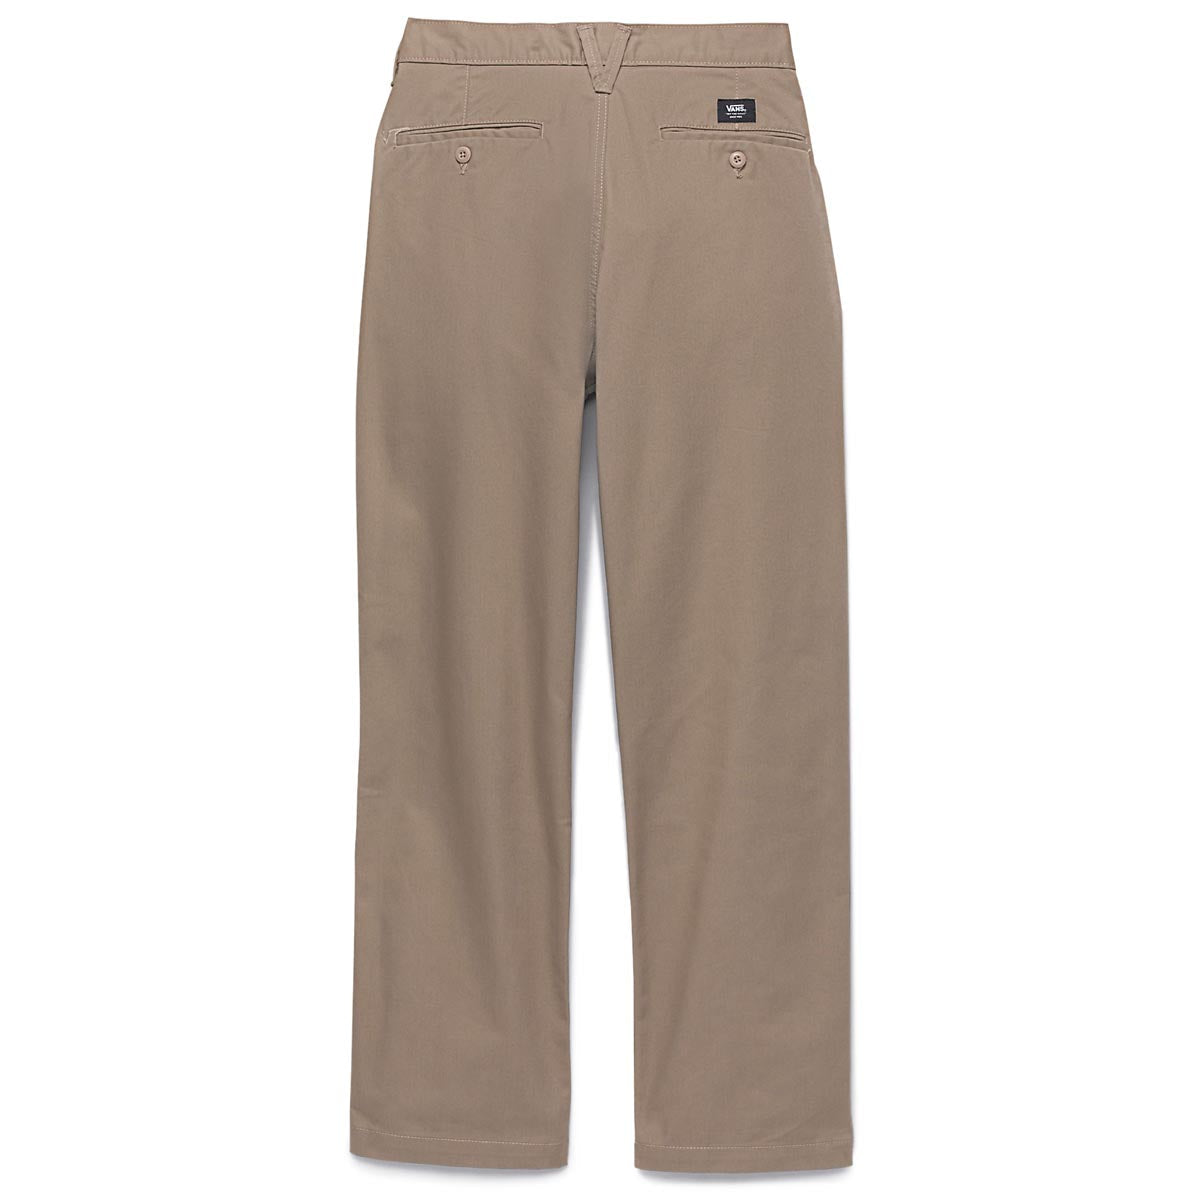 Vans Authentic Chino Relaxed Pants - Desert Taupe image 5